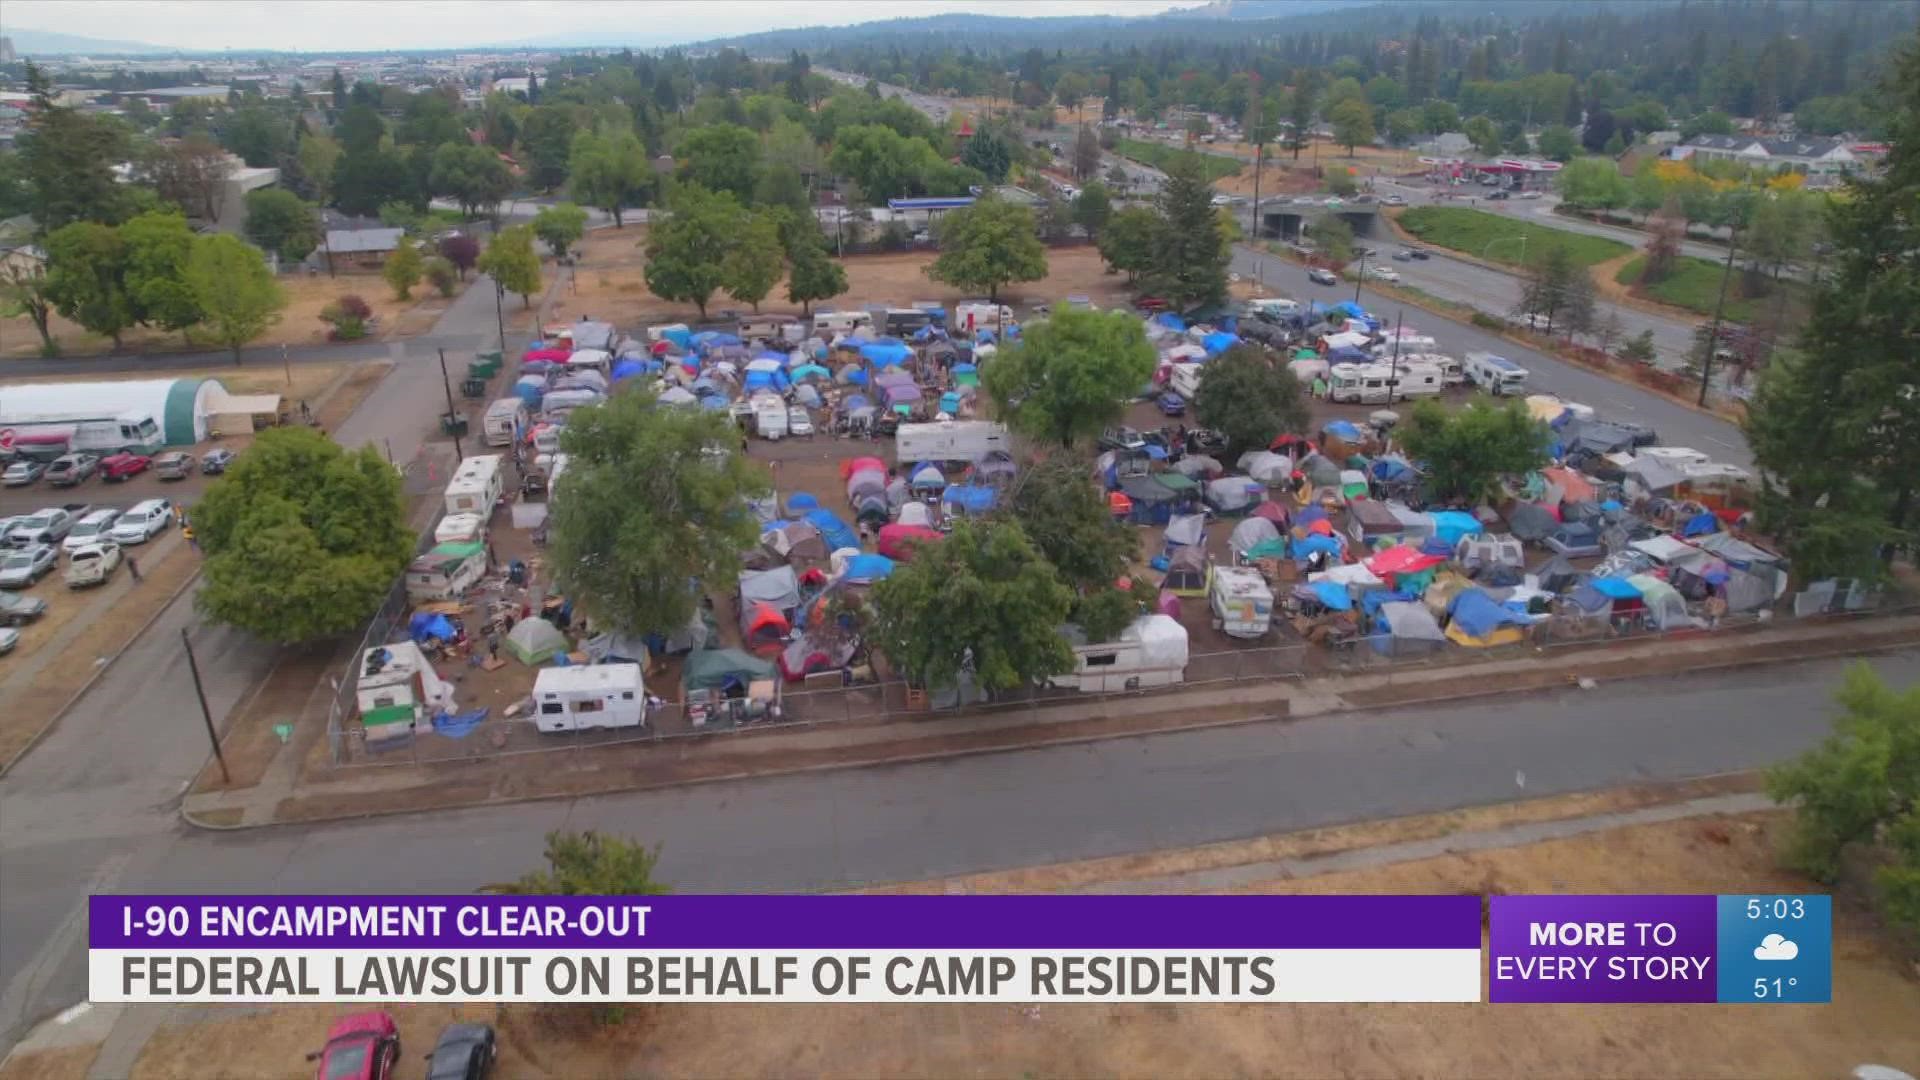 The lawsuit was filed by Jewel's Helping Hands to protect occupants on the homeless encampment on I-90 against being arrested.